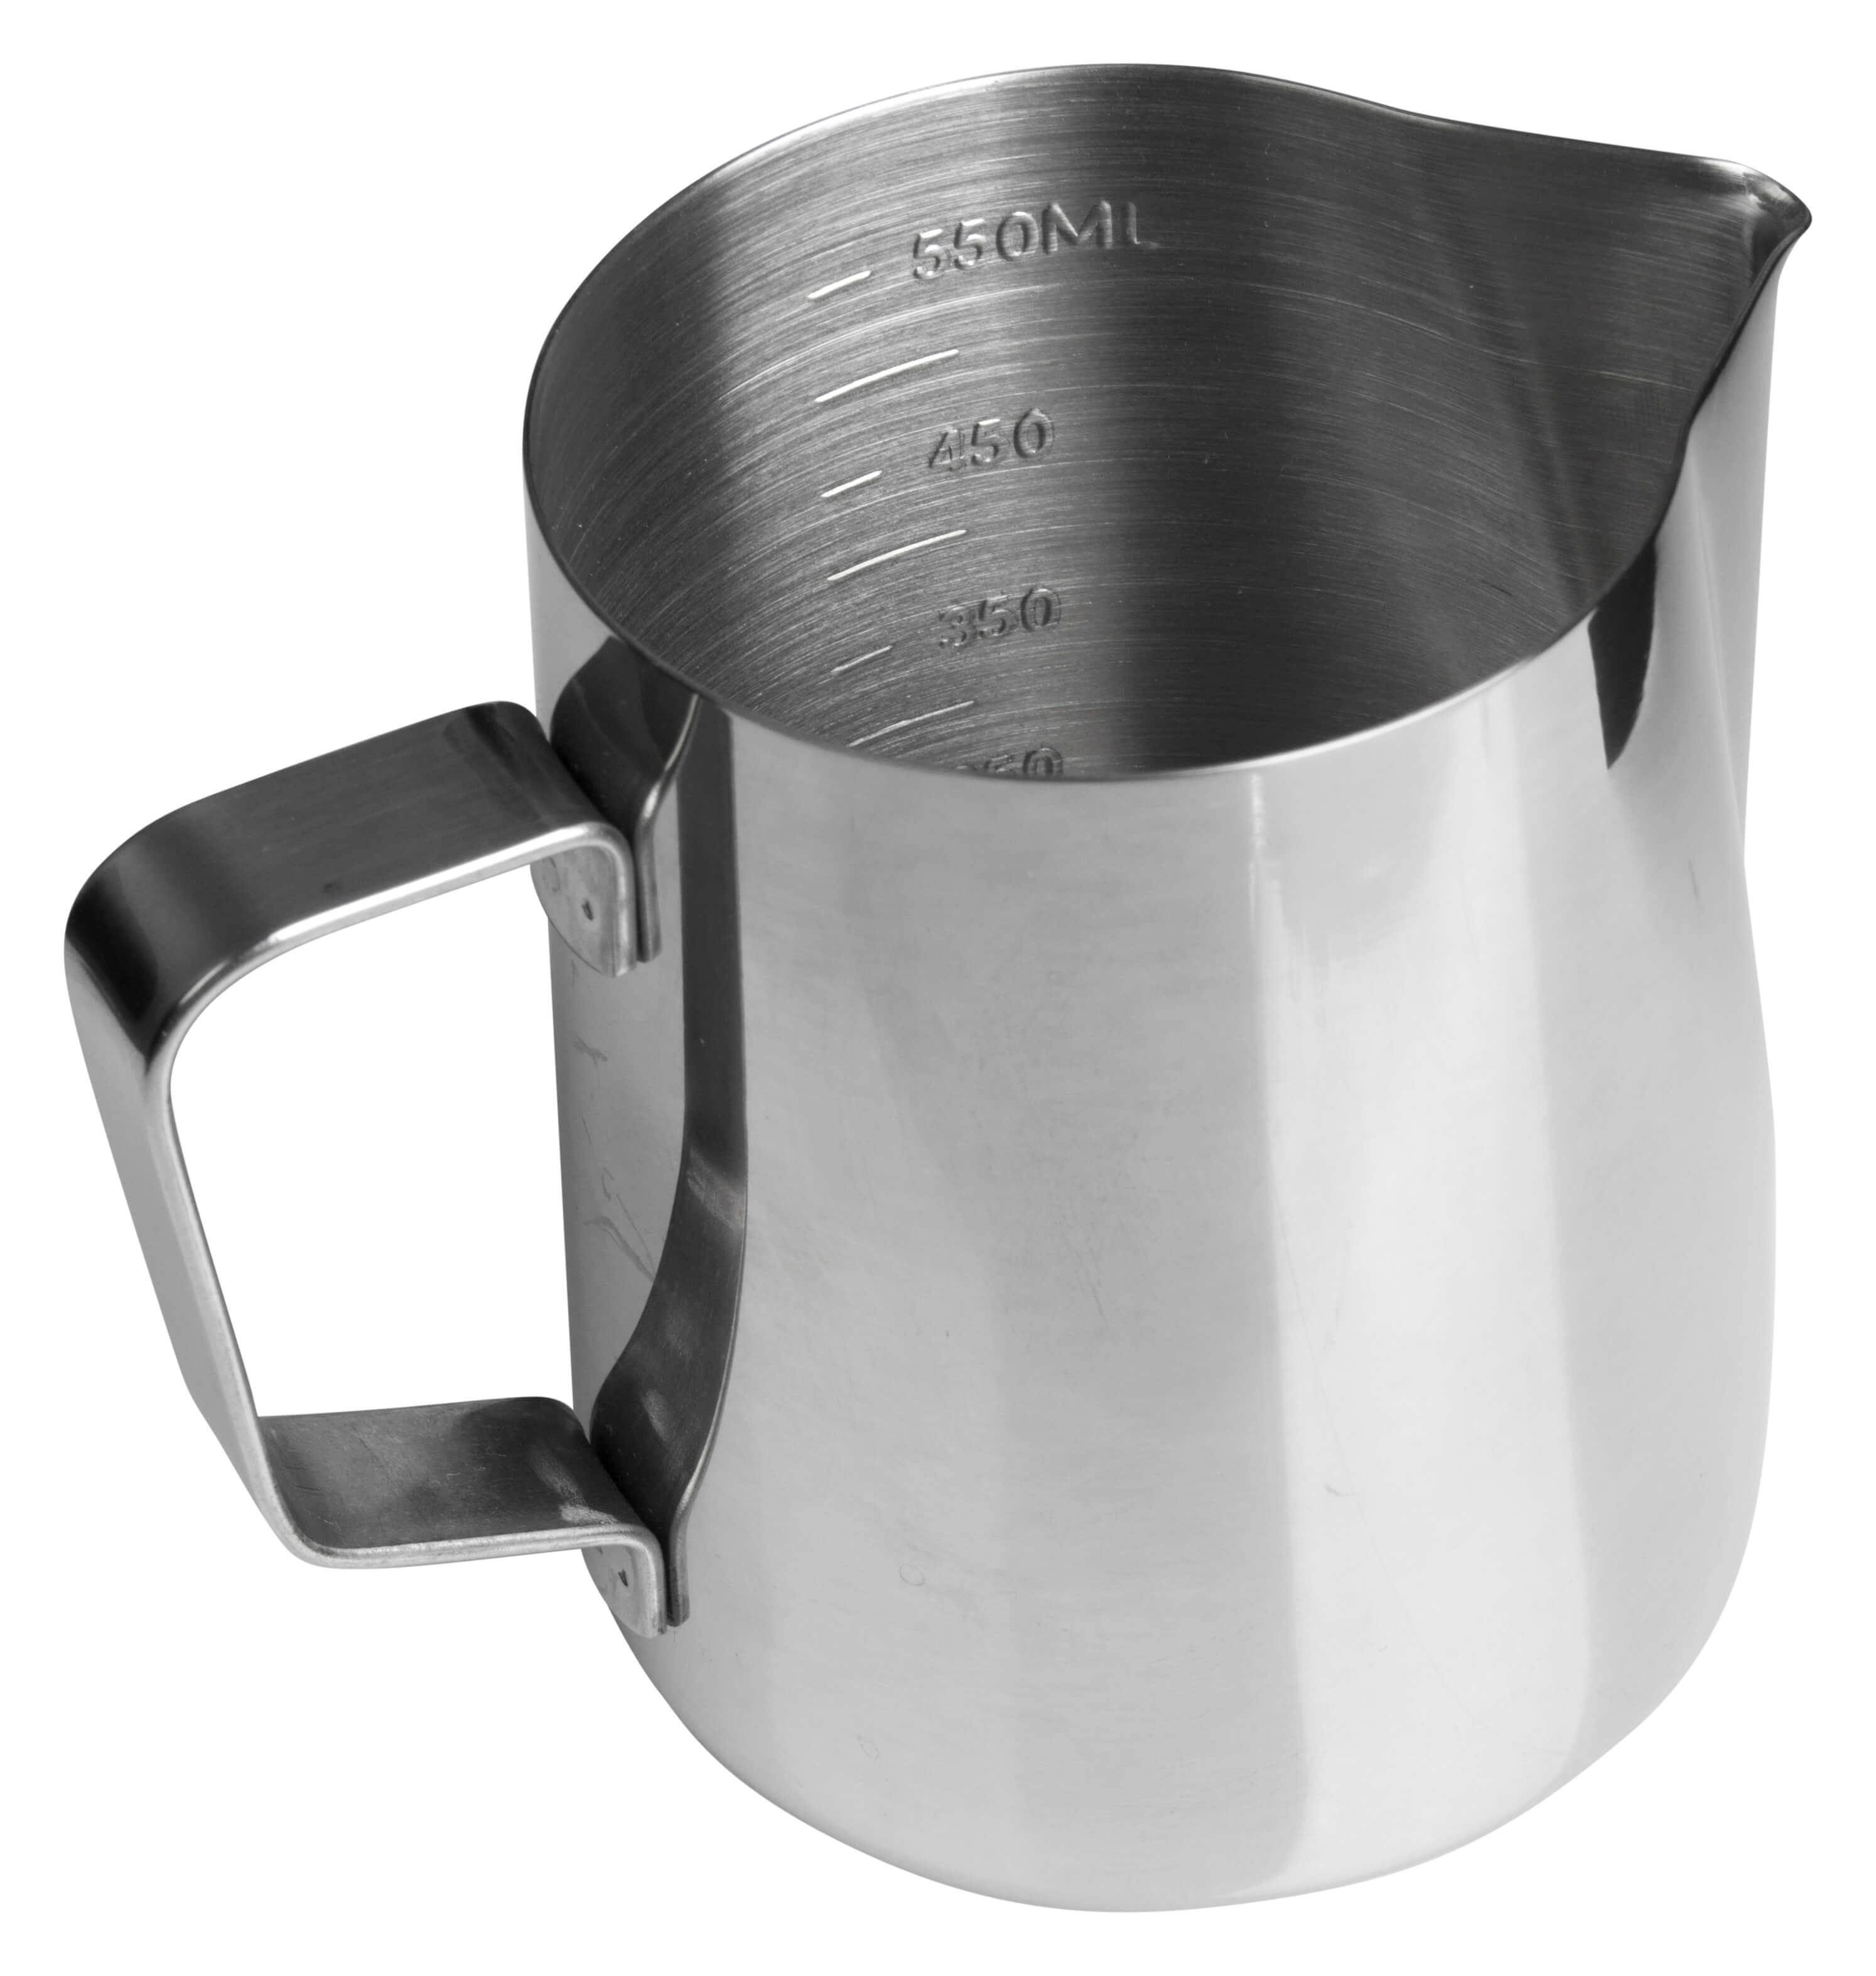 Milk jug, stainless steel with scaling - 600ml